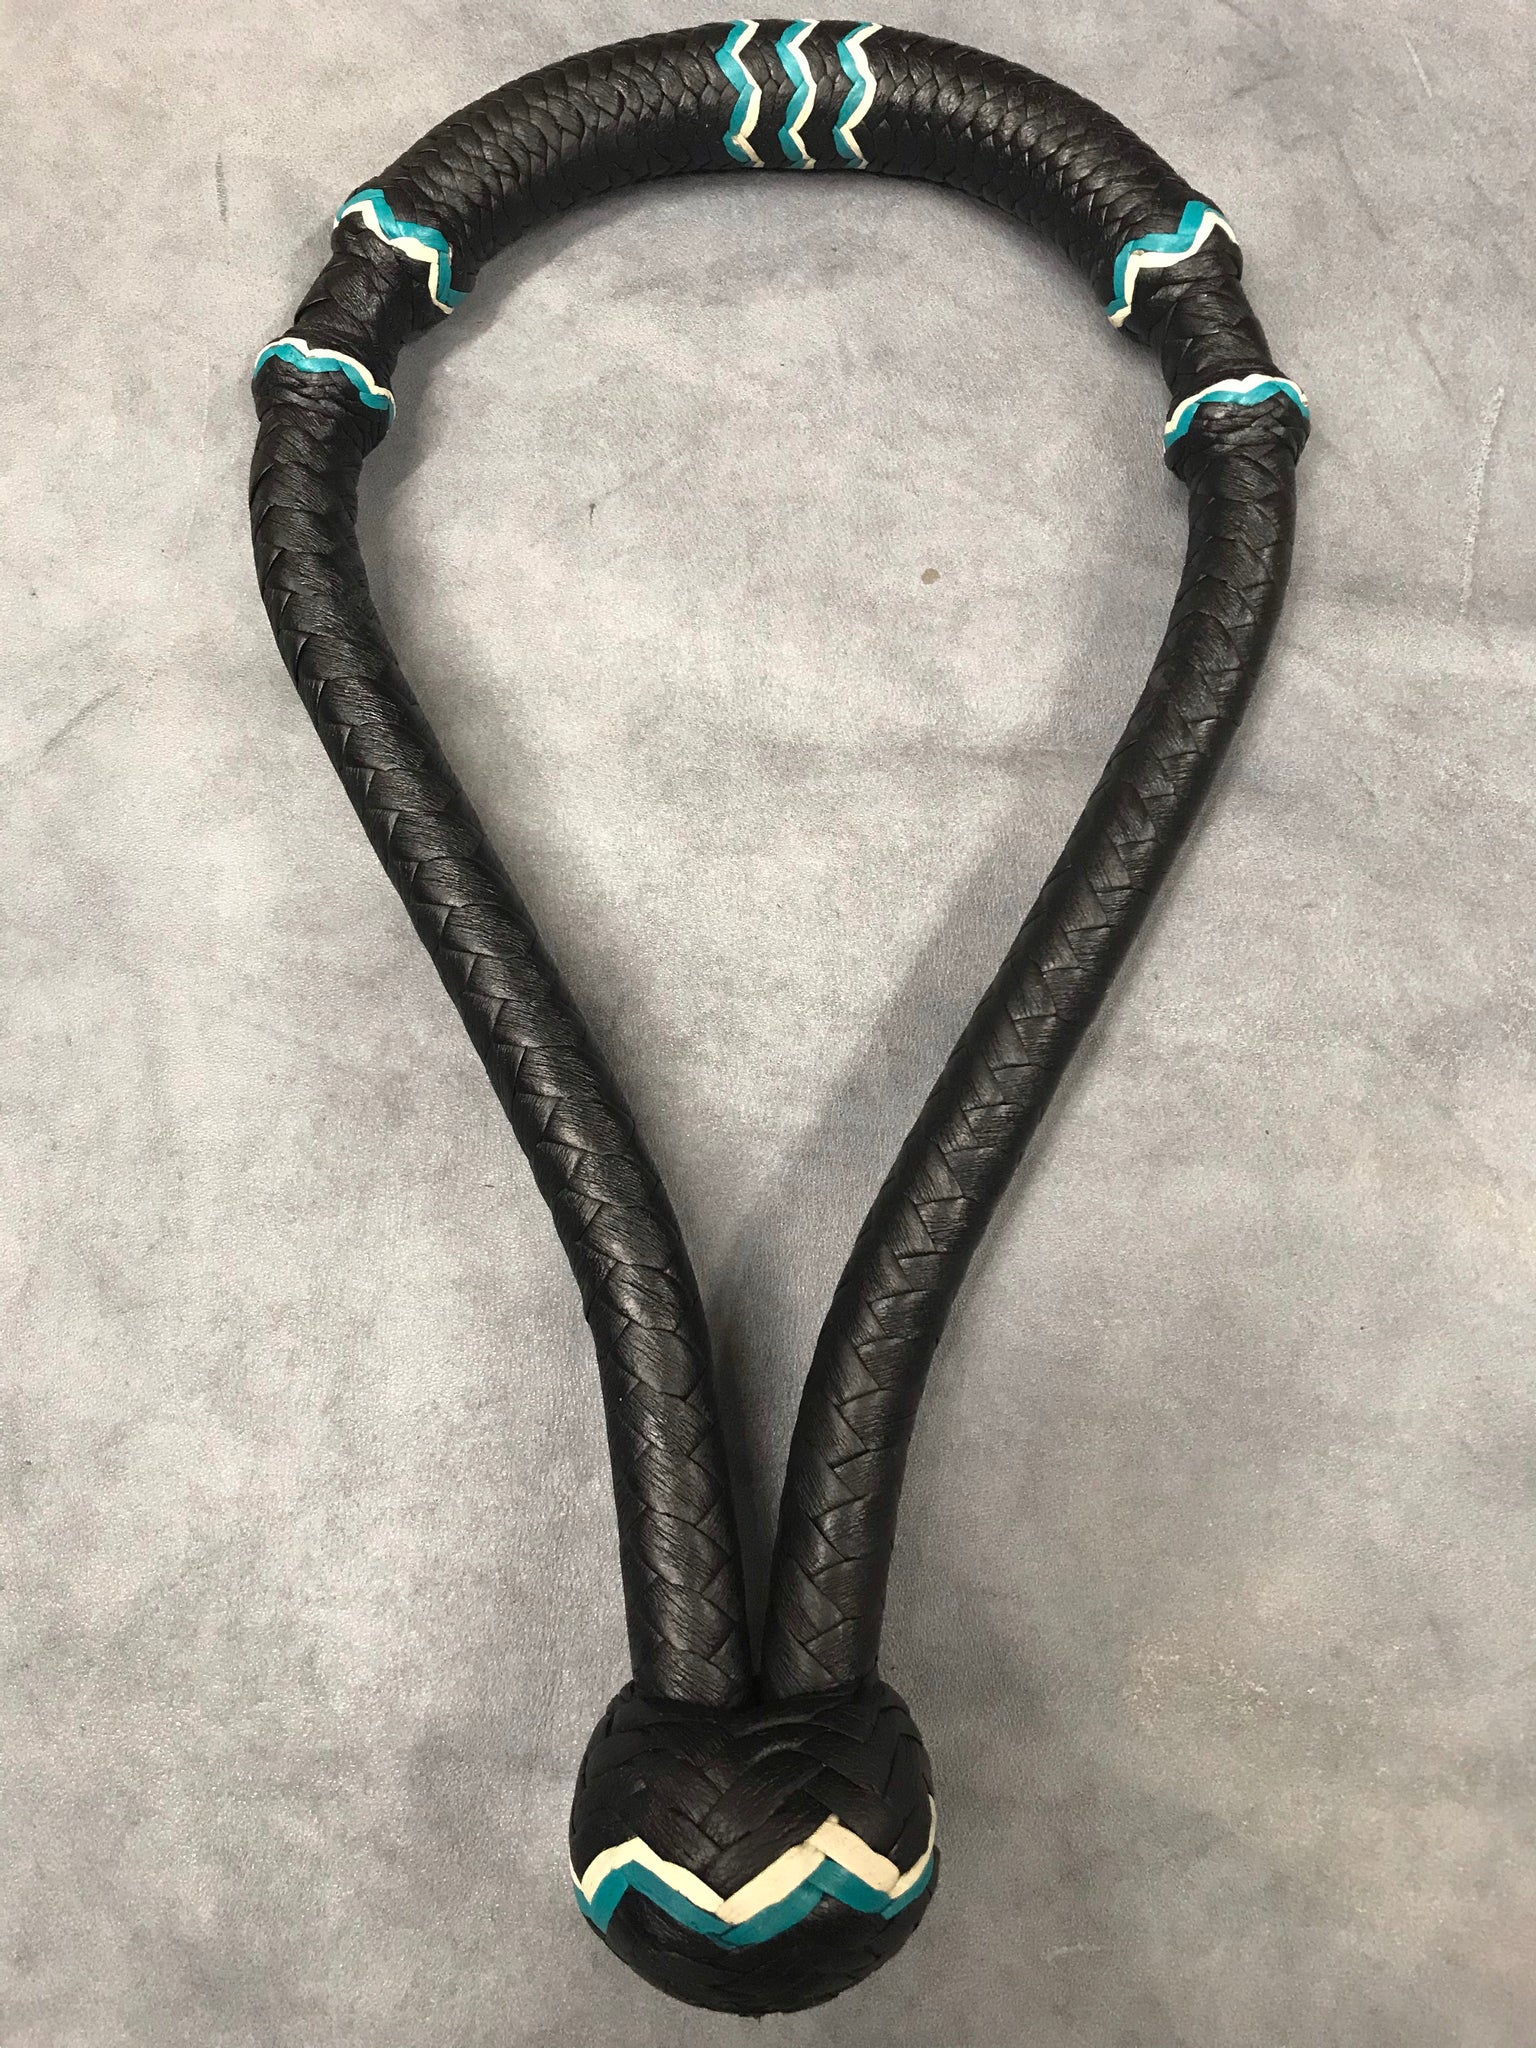 Bosal with Rawhide nose-band and Horsehair sides – J.M. Capriola